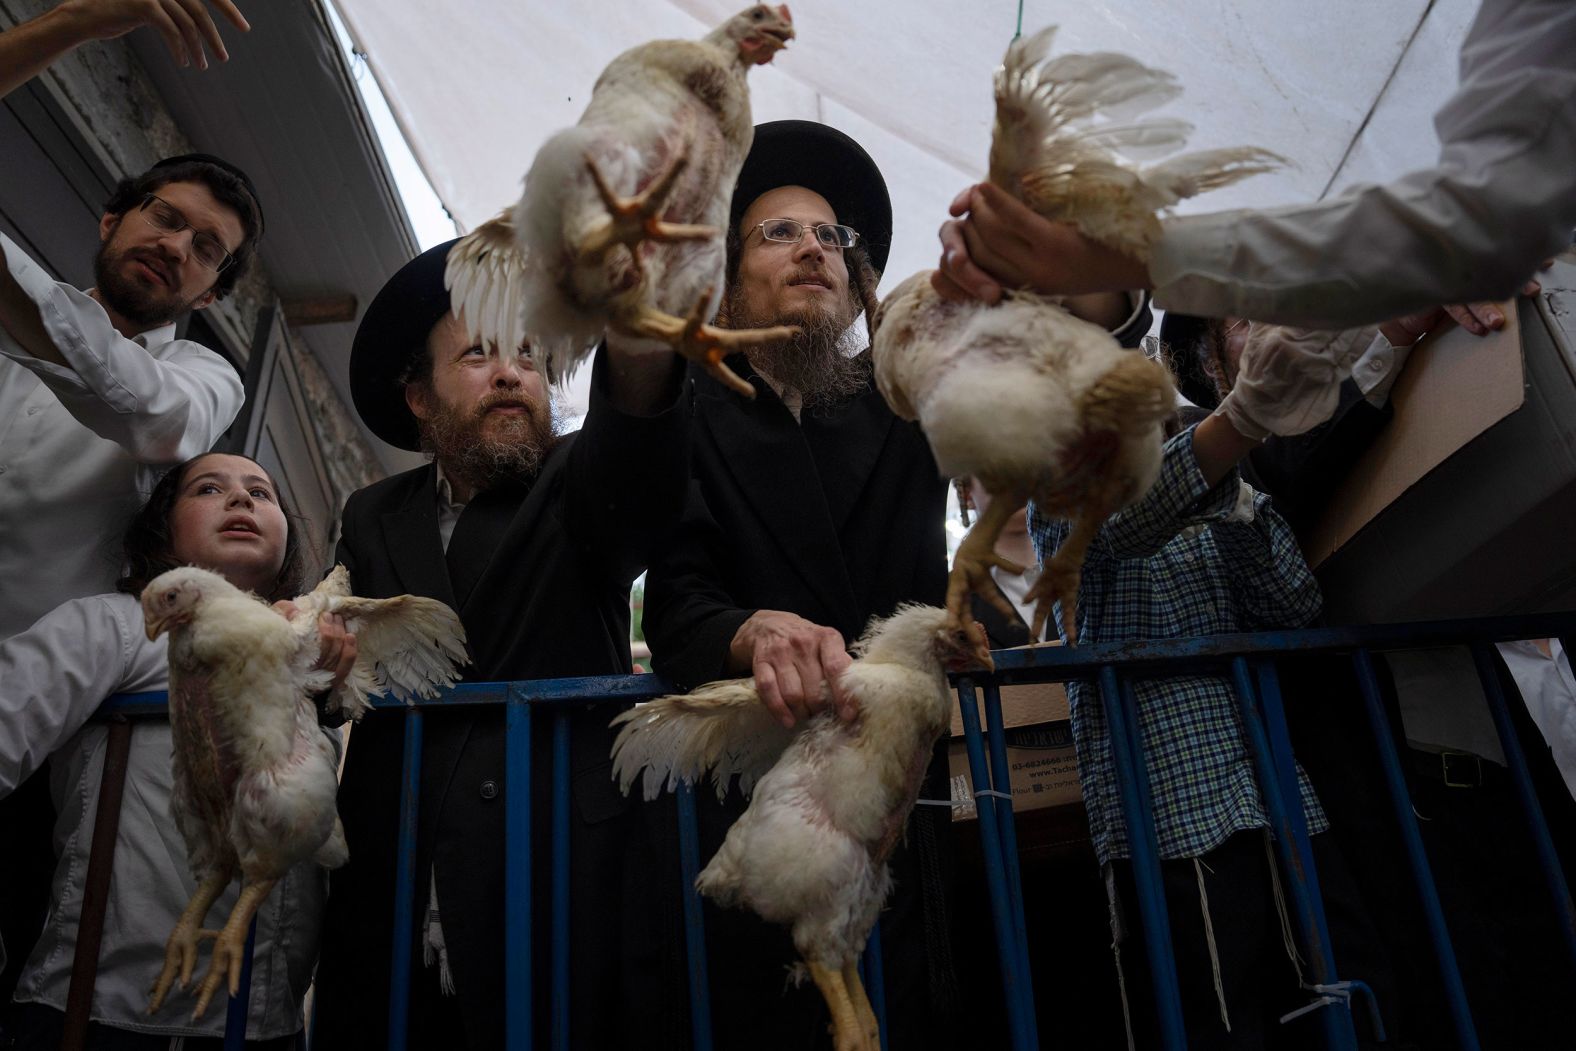 Ultra-Orthodox Jewish men buy chickens to perform the Kaparot ritual in Bnei Brak, near Tel Aviv, Israel, on Monday, October 3. They believe the ritual transfers one's sins from the past year into the chicken. It is performed before the Day of Atonement — Yom Kippur — the holiest day in the Jewish year which started at sundown Tuesday.